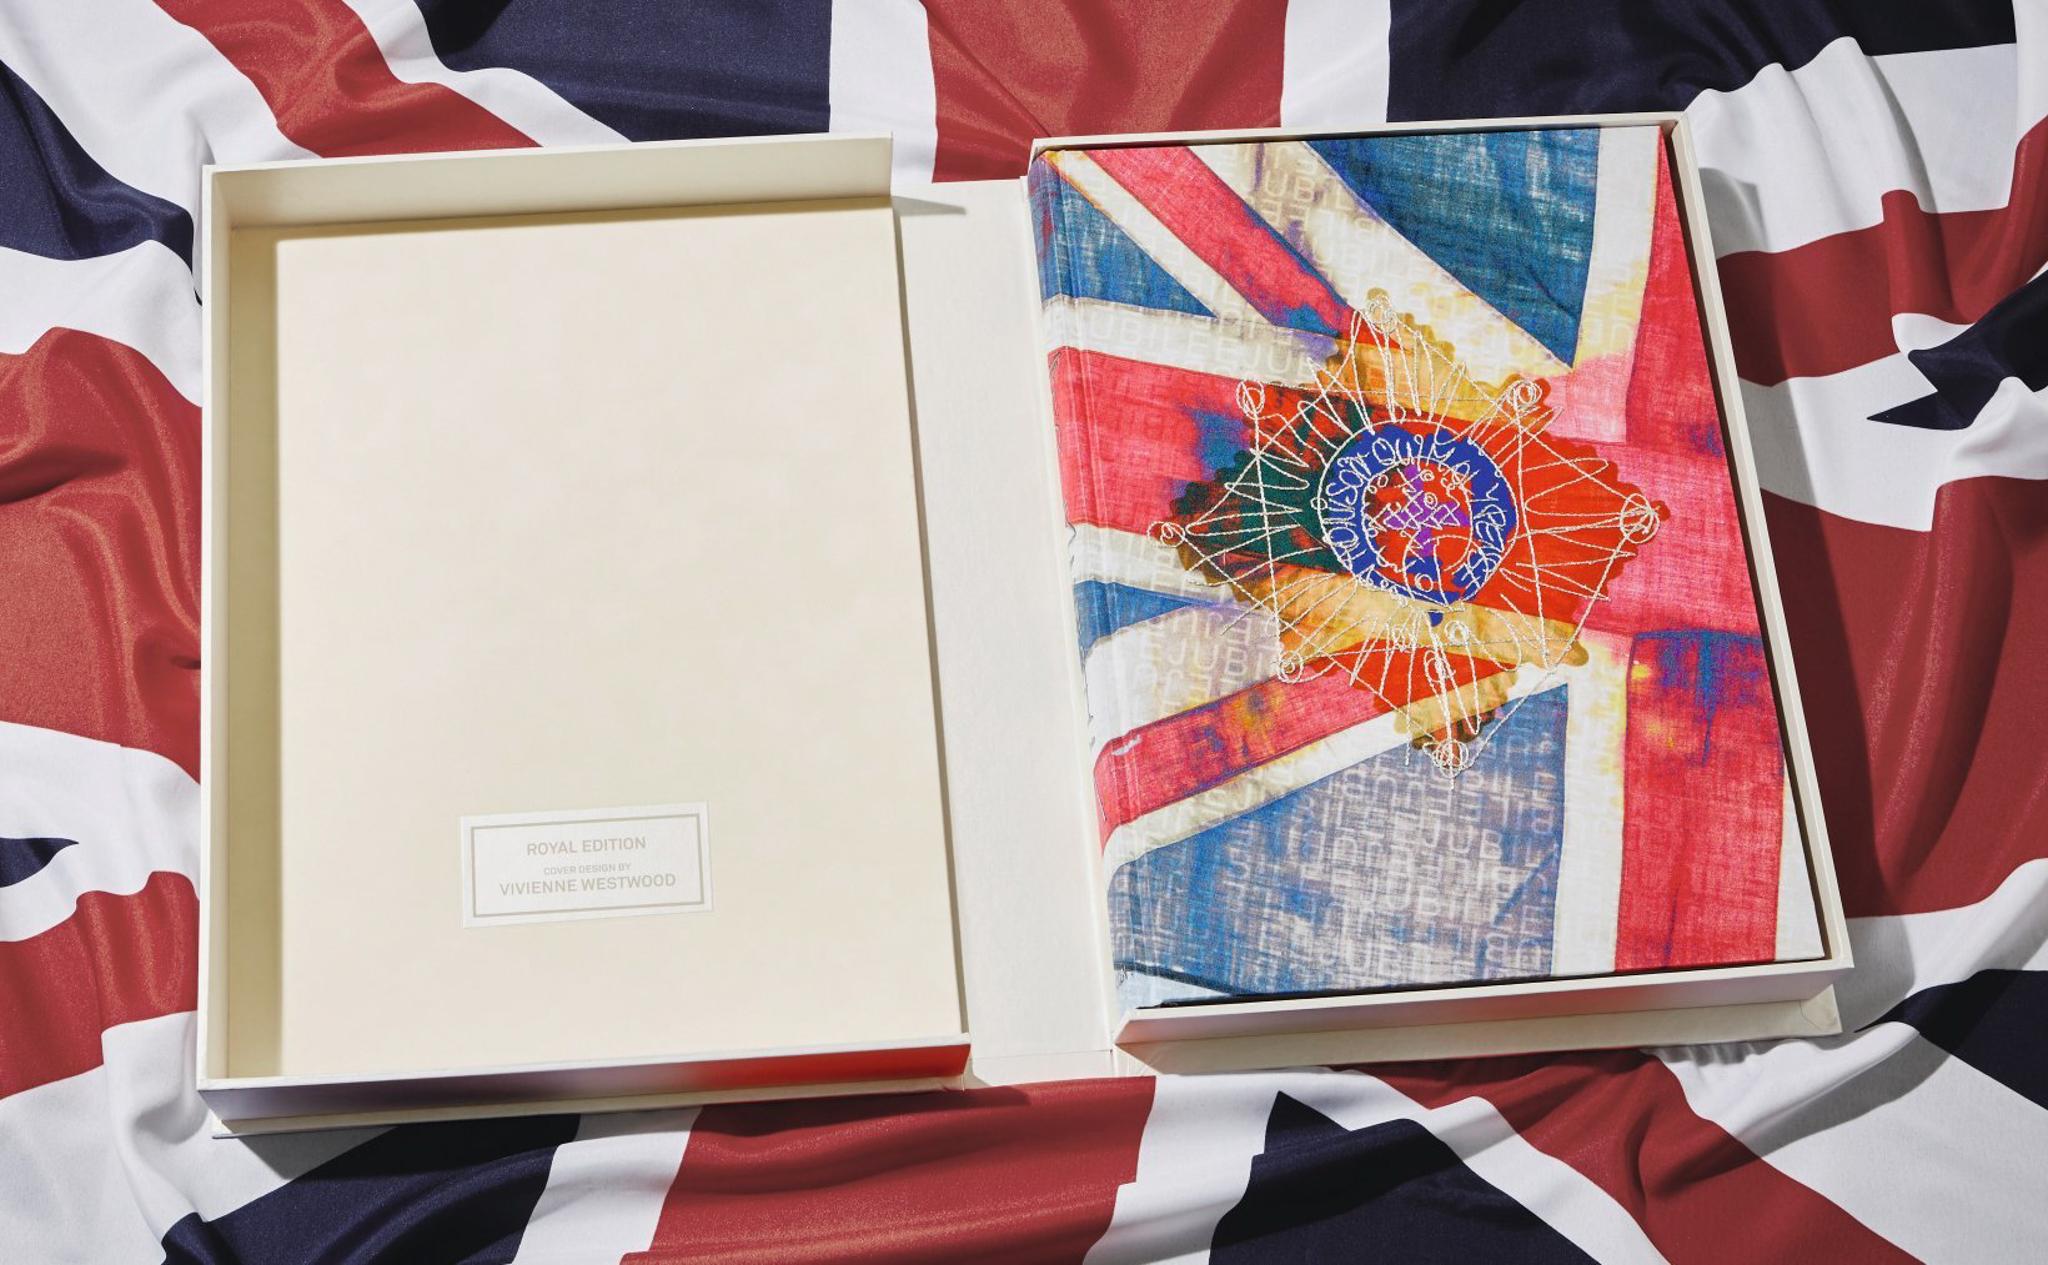 Her Majesty - Limited TASCHEN Art Edition with Hand-Signed Gelatin Silver Print - Photograph by Harry Benson